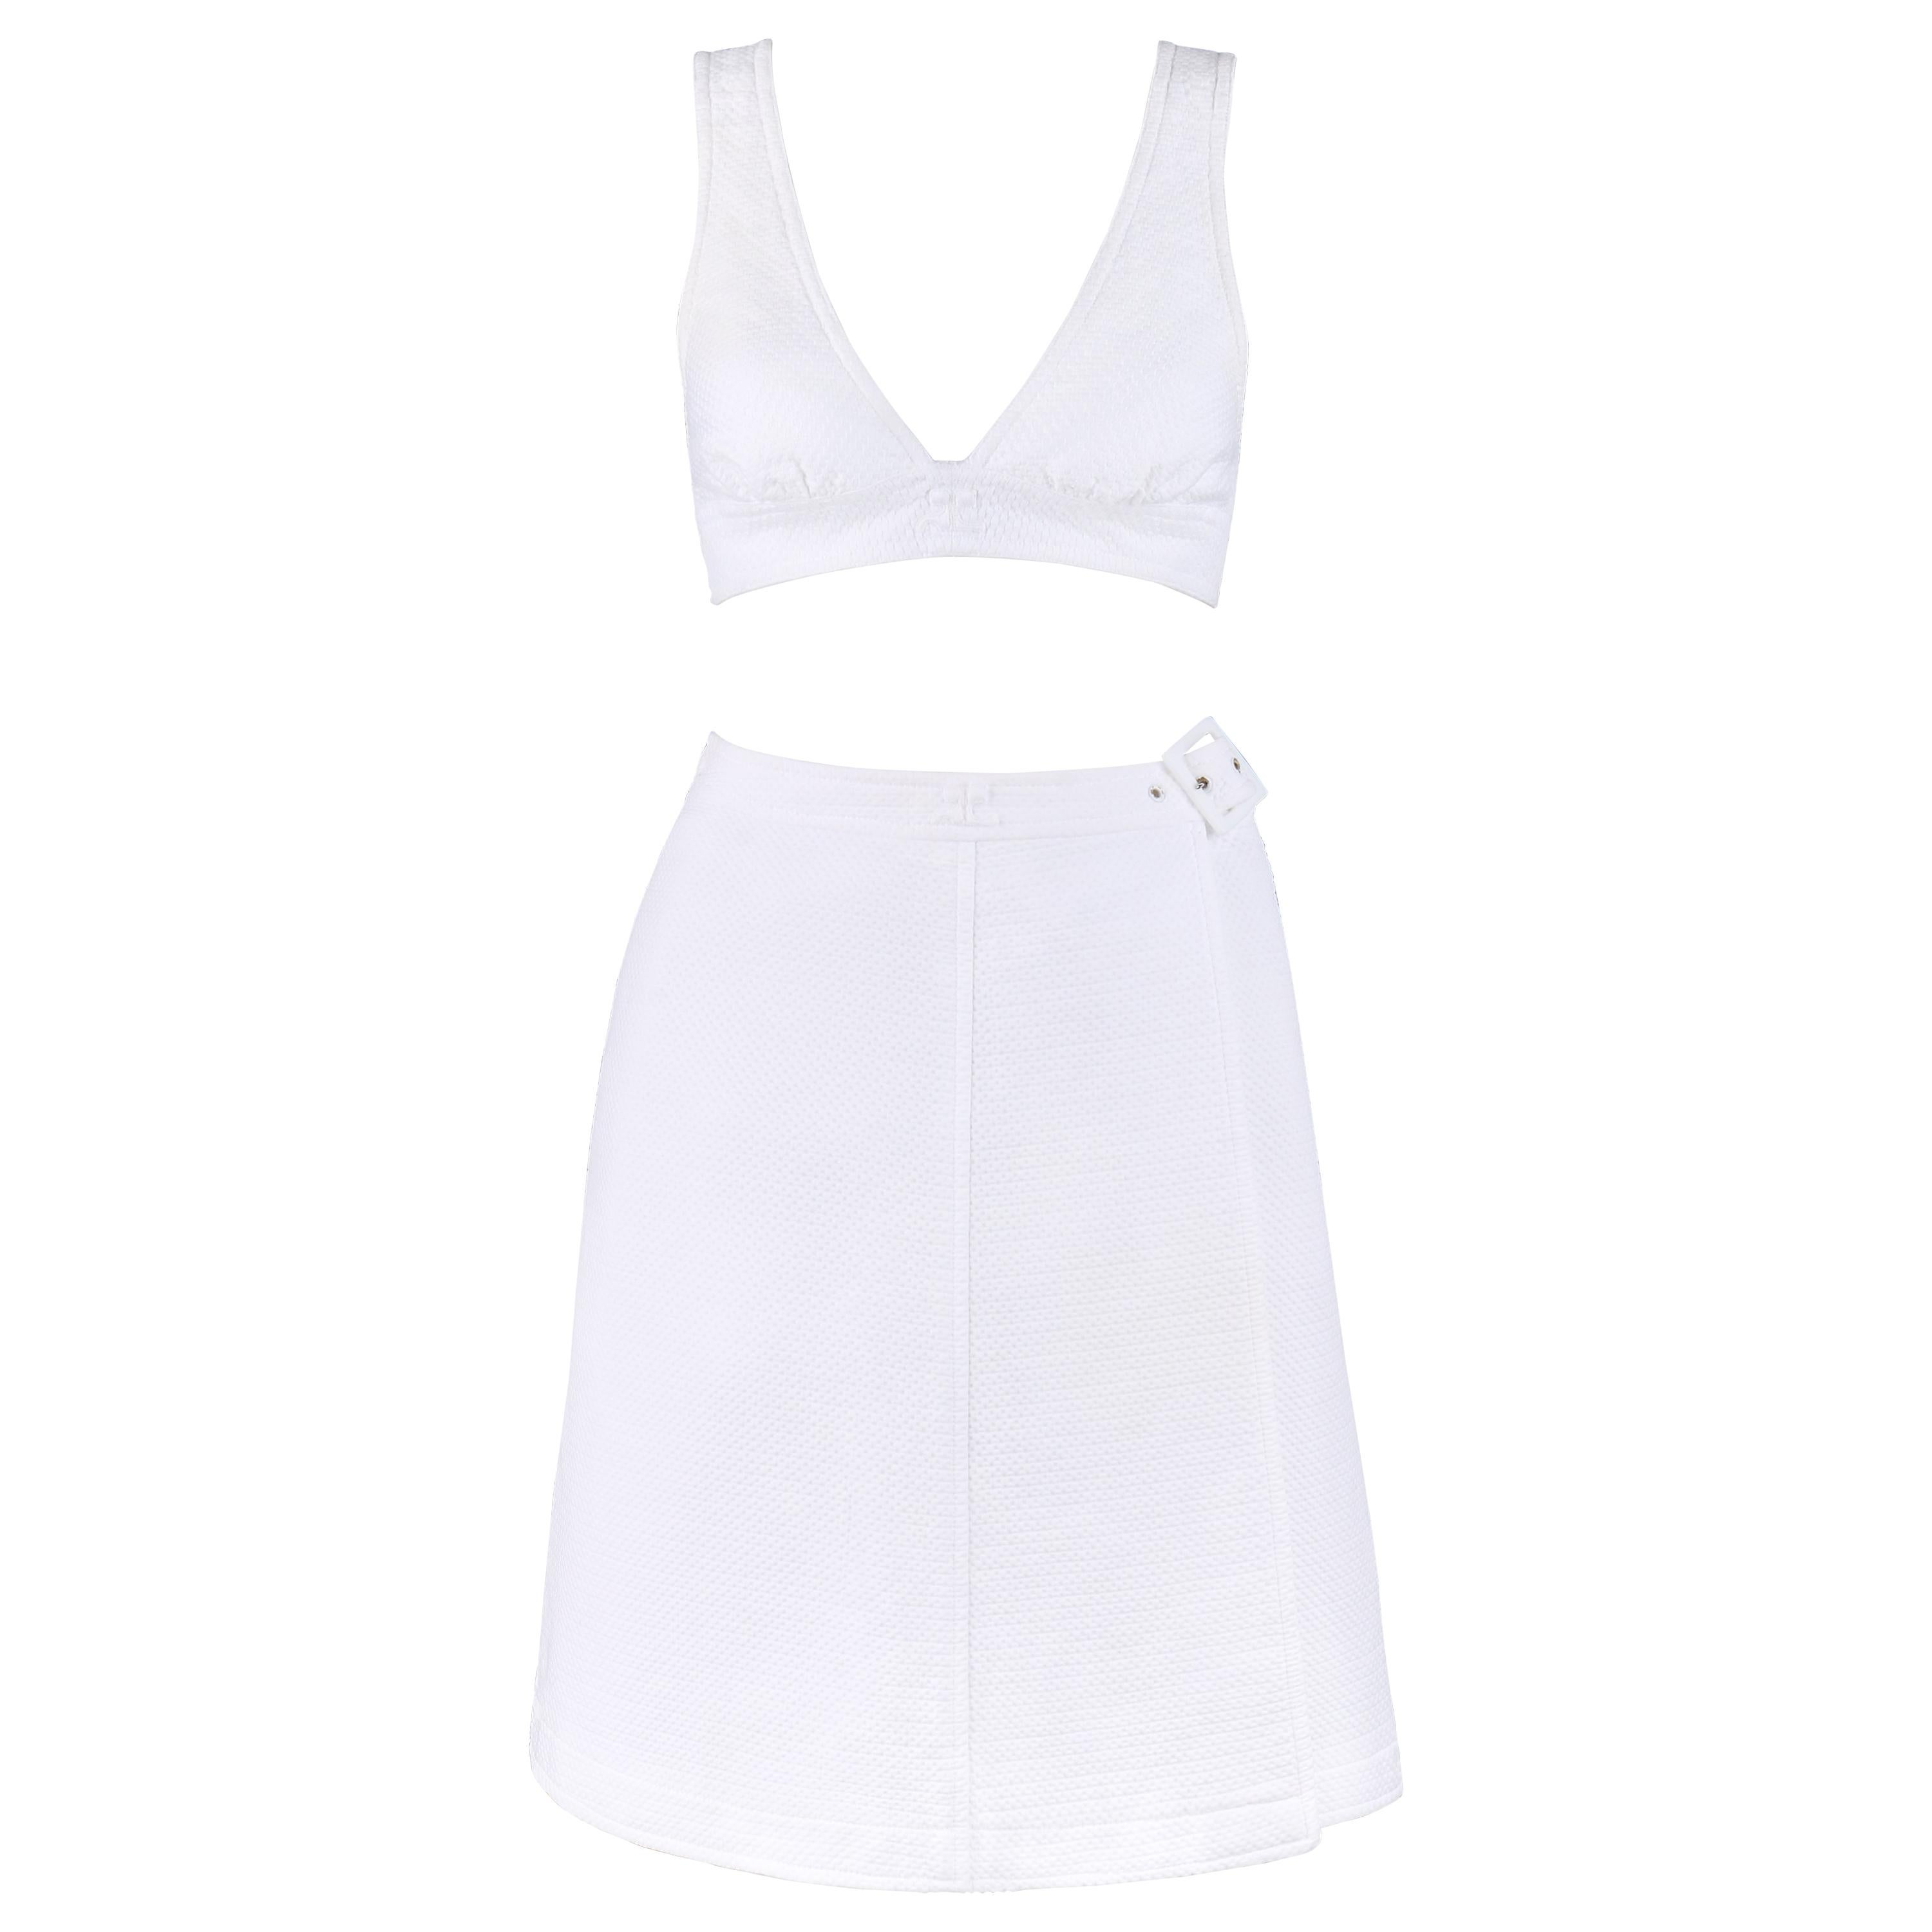 COURREGES c.1970’s 2 Pc White Textured Bralette Tank Top Belted Wrap Skirt Set 